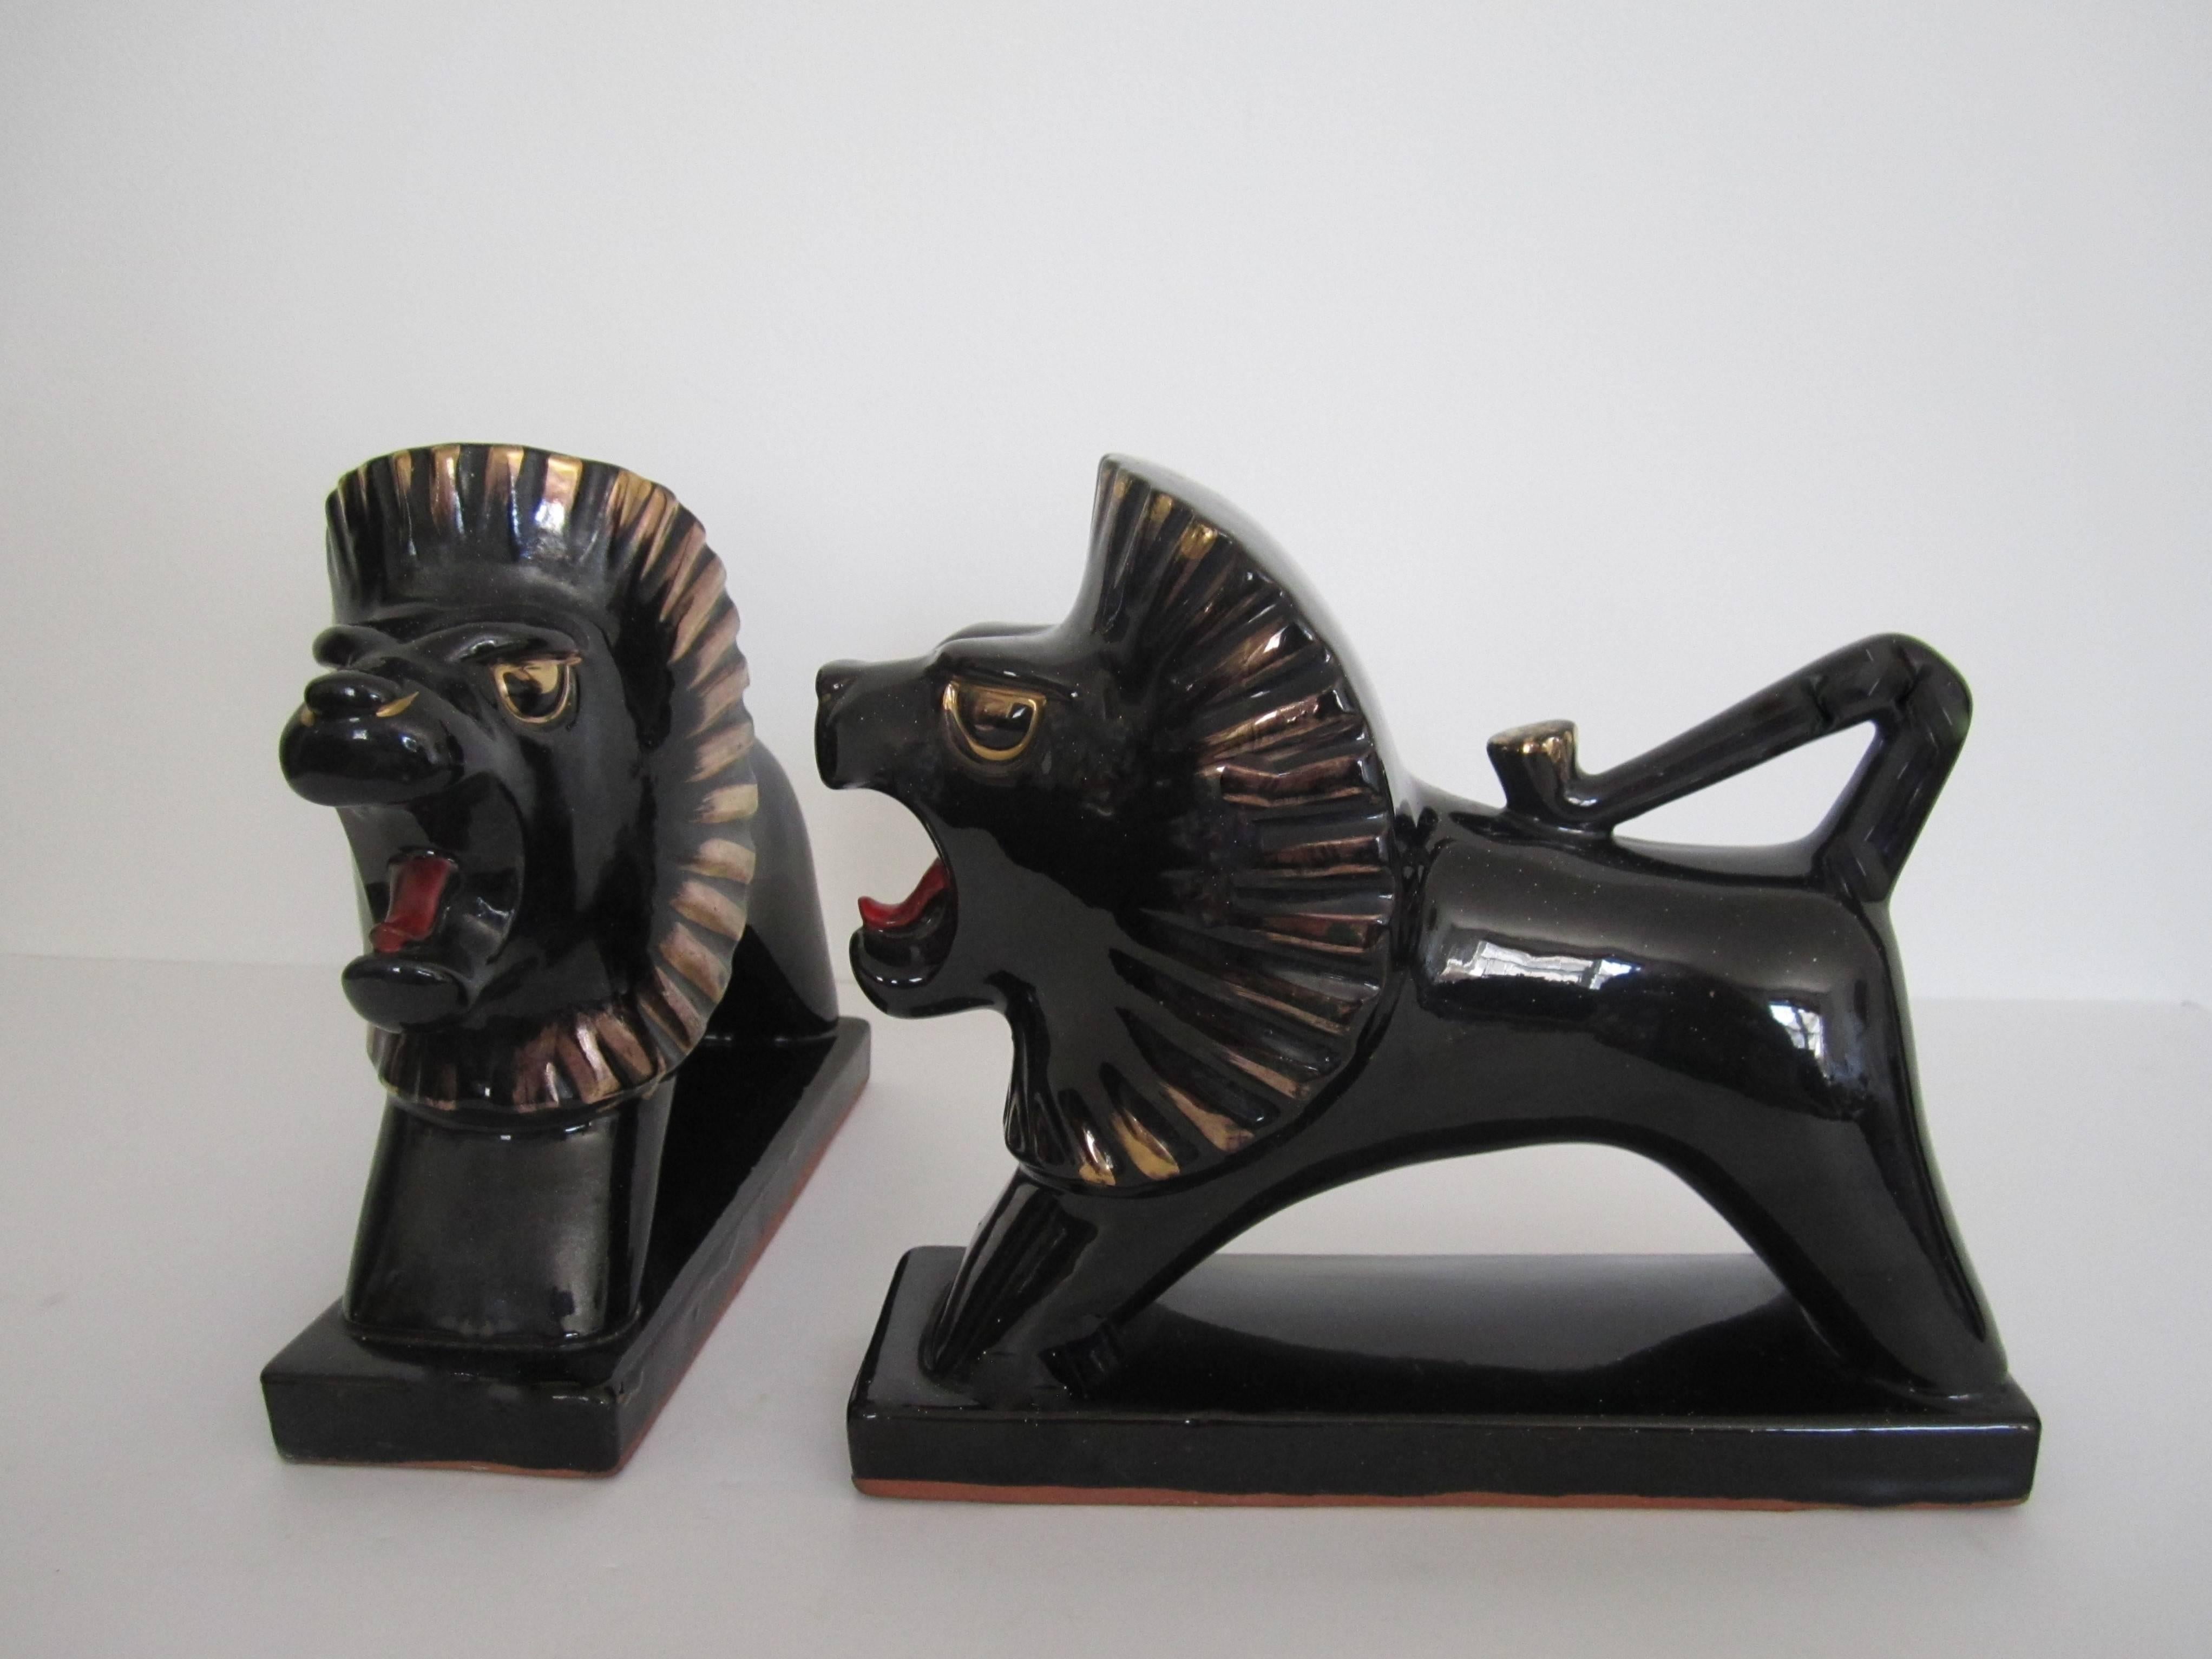 Japanese Art Deco Black and Gold Lion Bookends or Decorative Objects, Pair